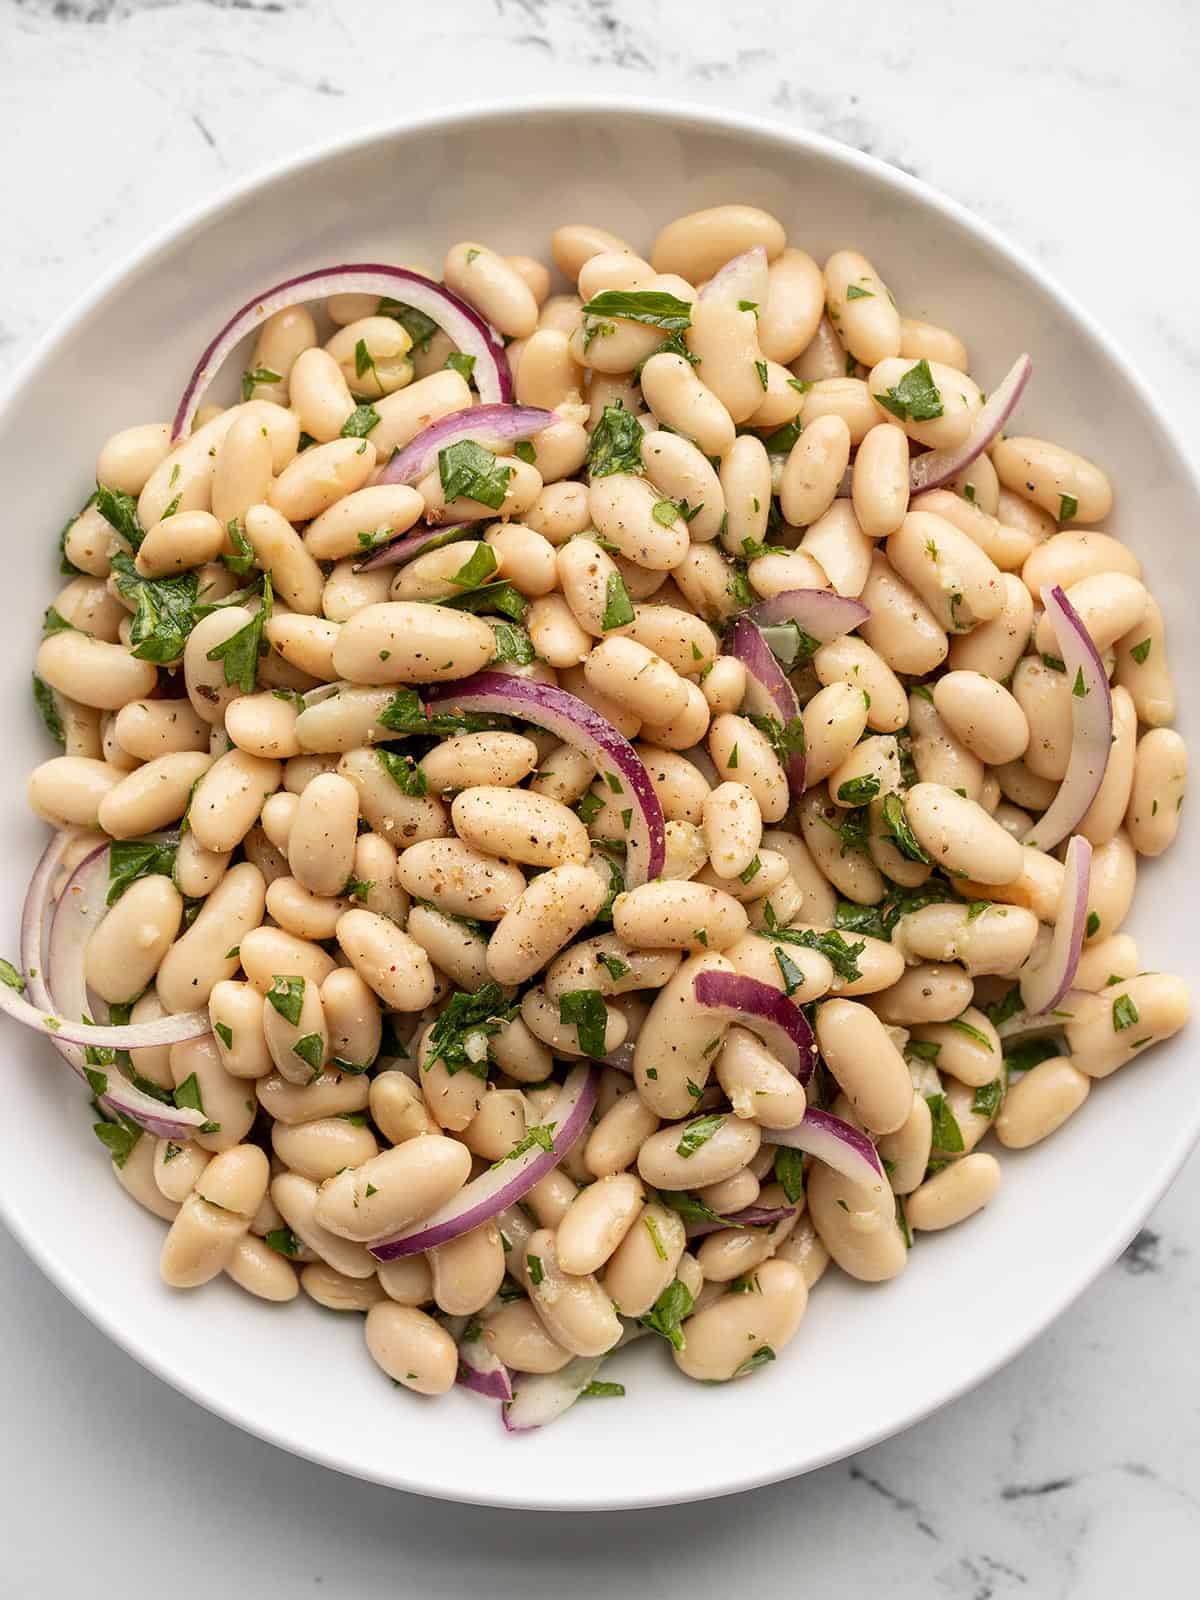 Overhead view of lemony white bean salad in a bowl.